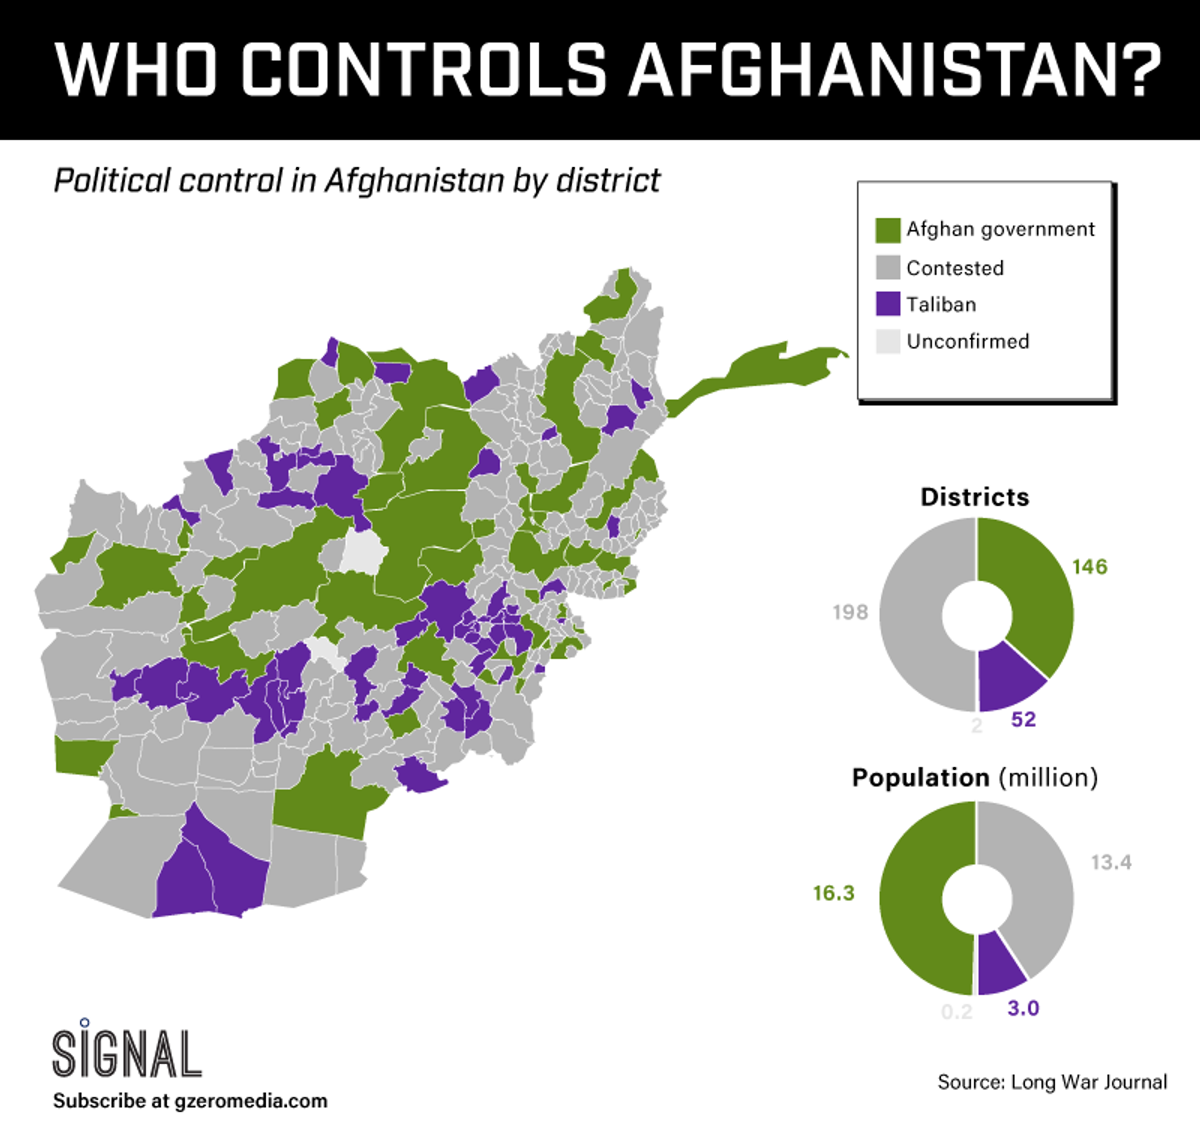 GRAPHIC TRUTH: WHO CONTROLS AFGHANISTAN?